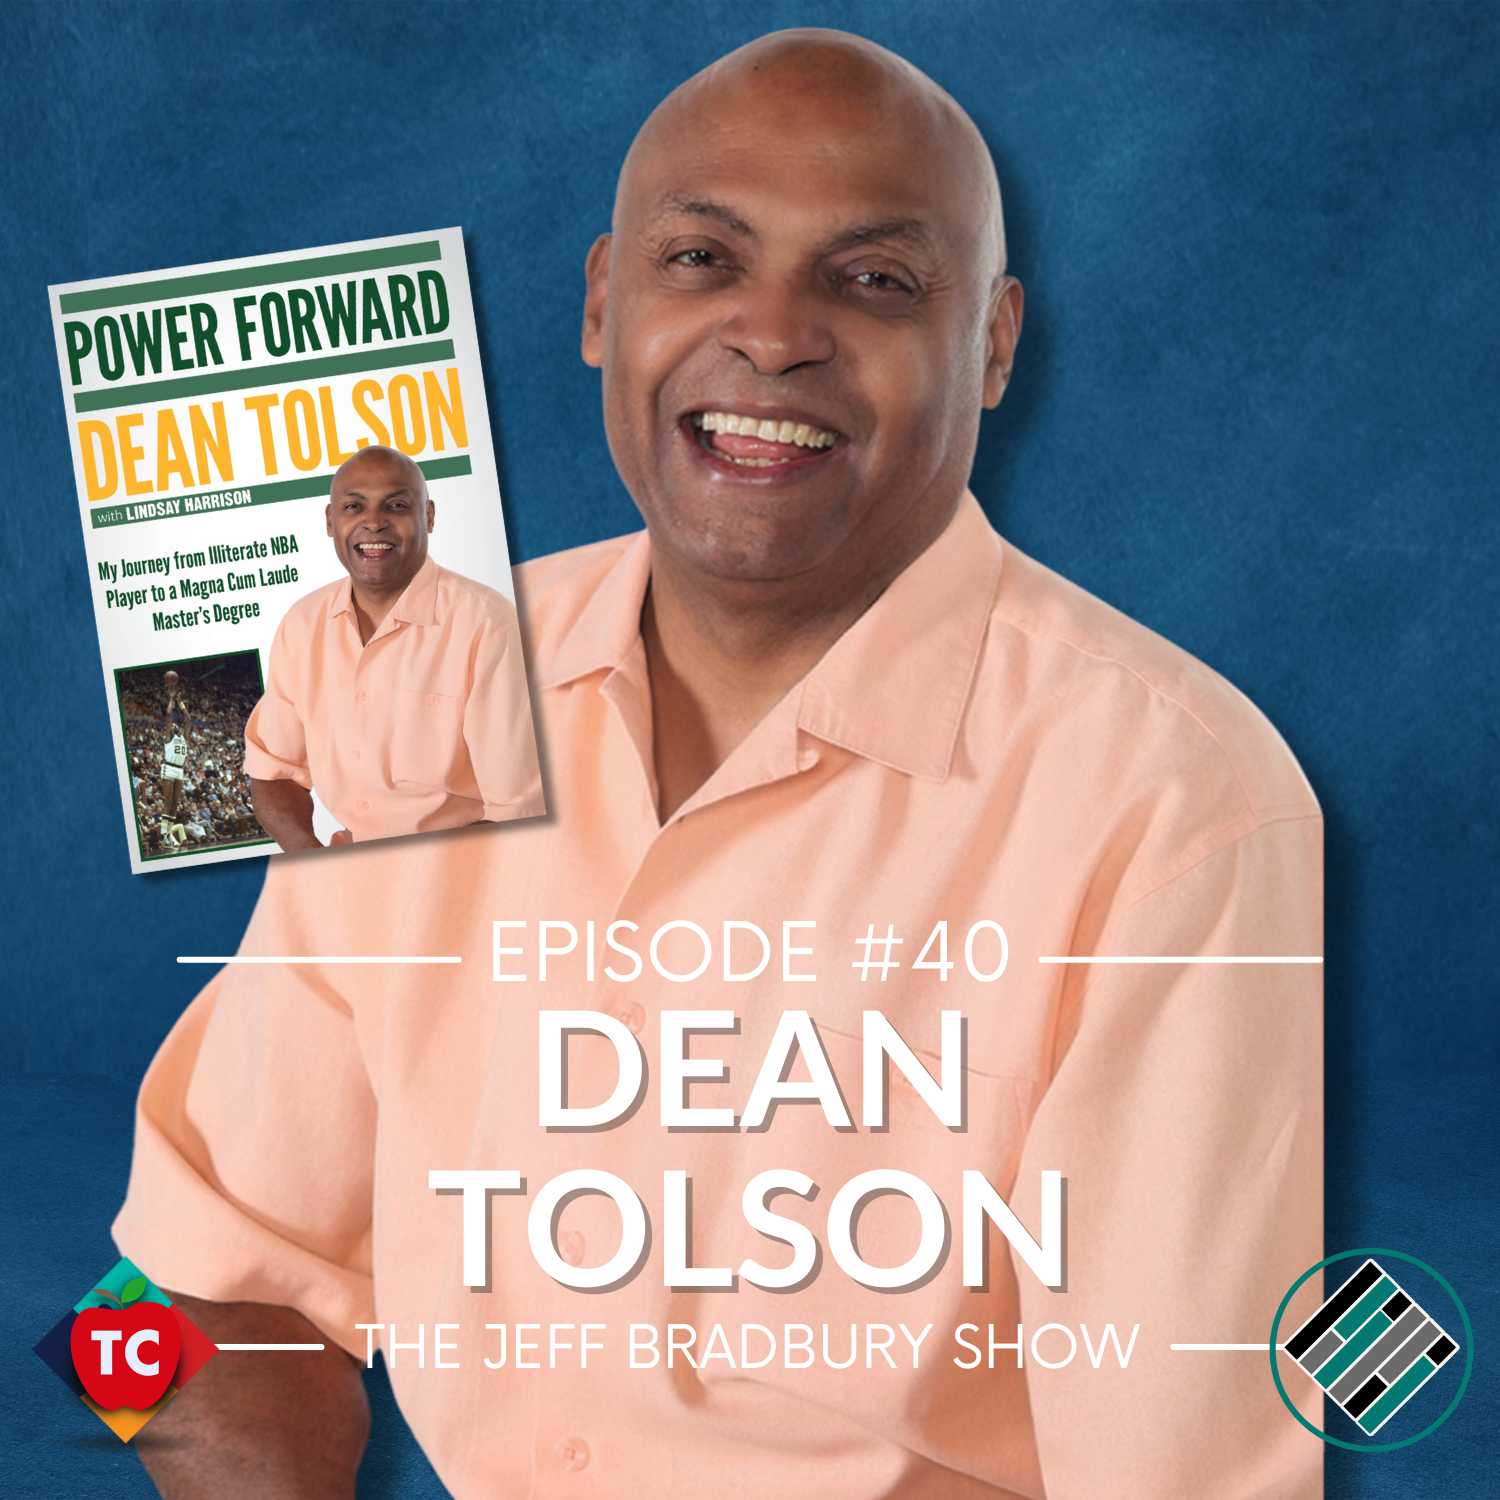 Dean Tolson – NBA Basketball Player and Author of the book Power Forward